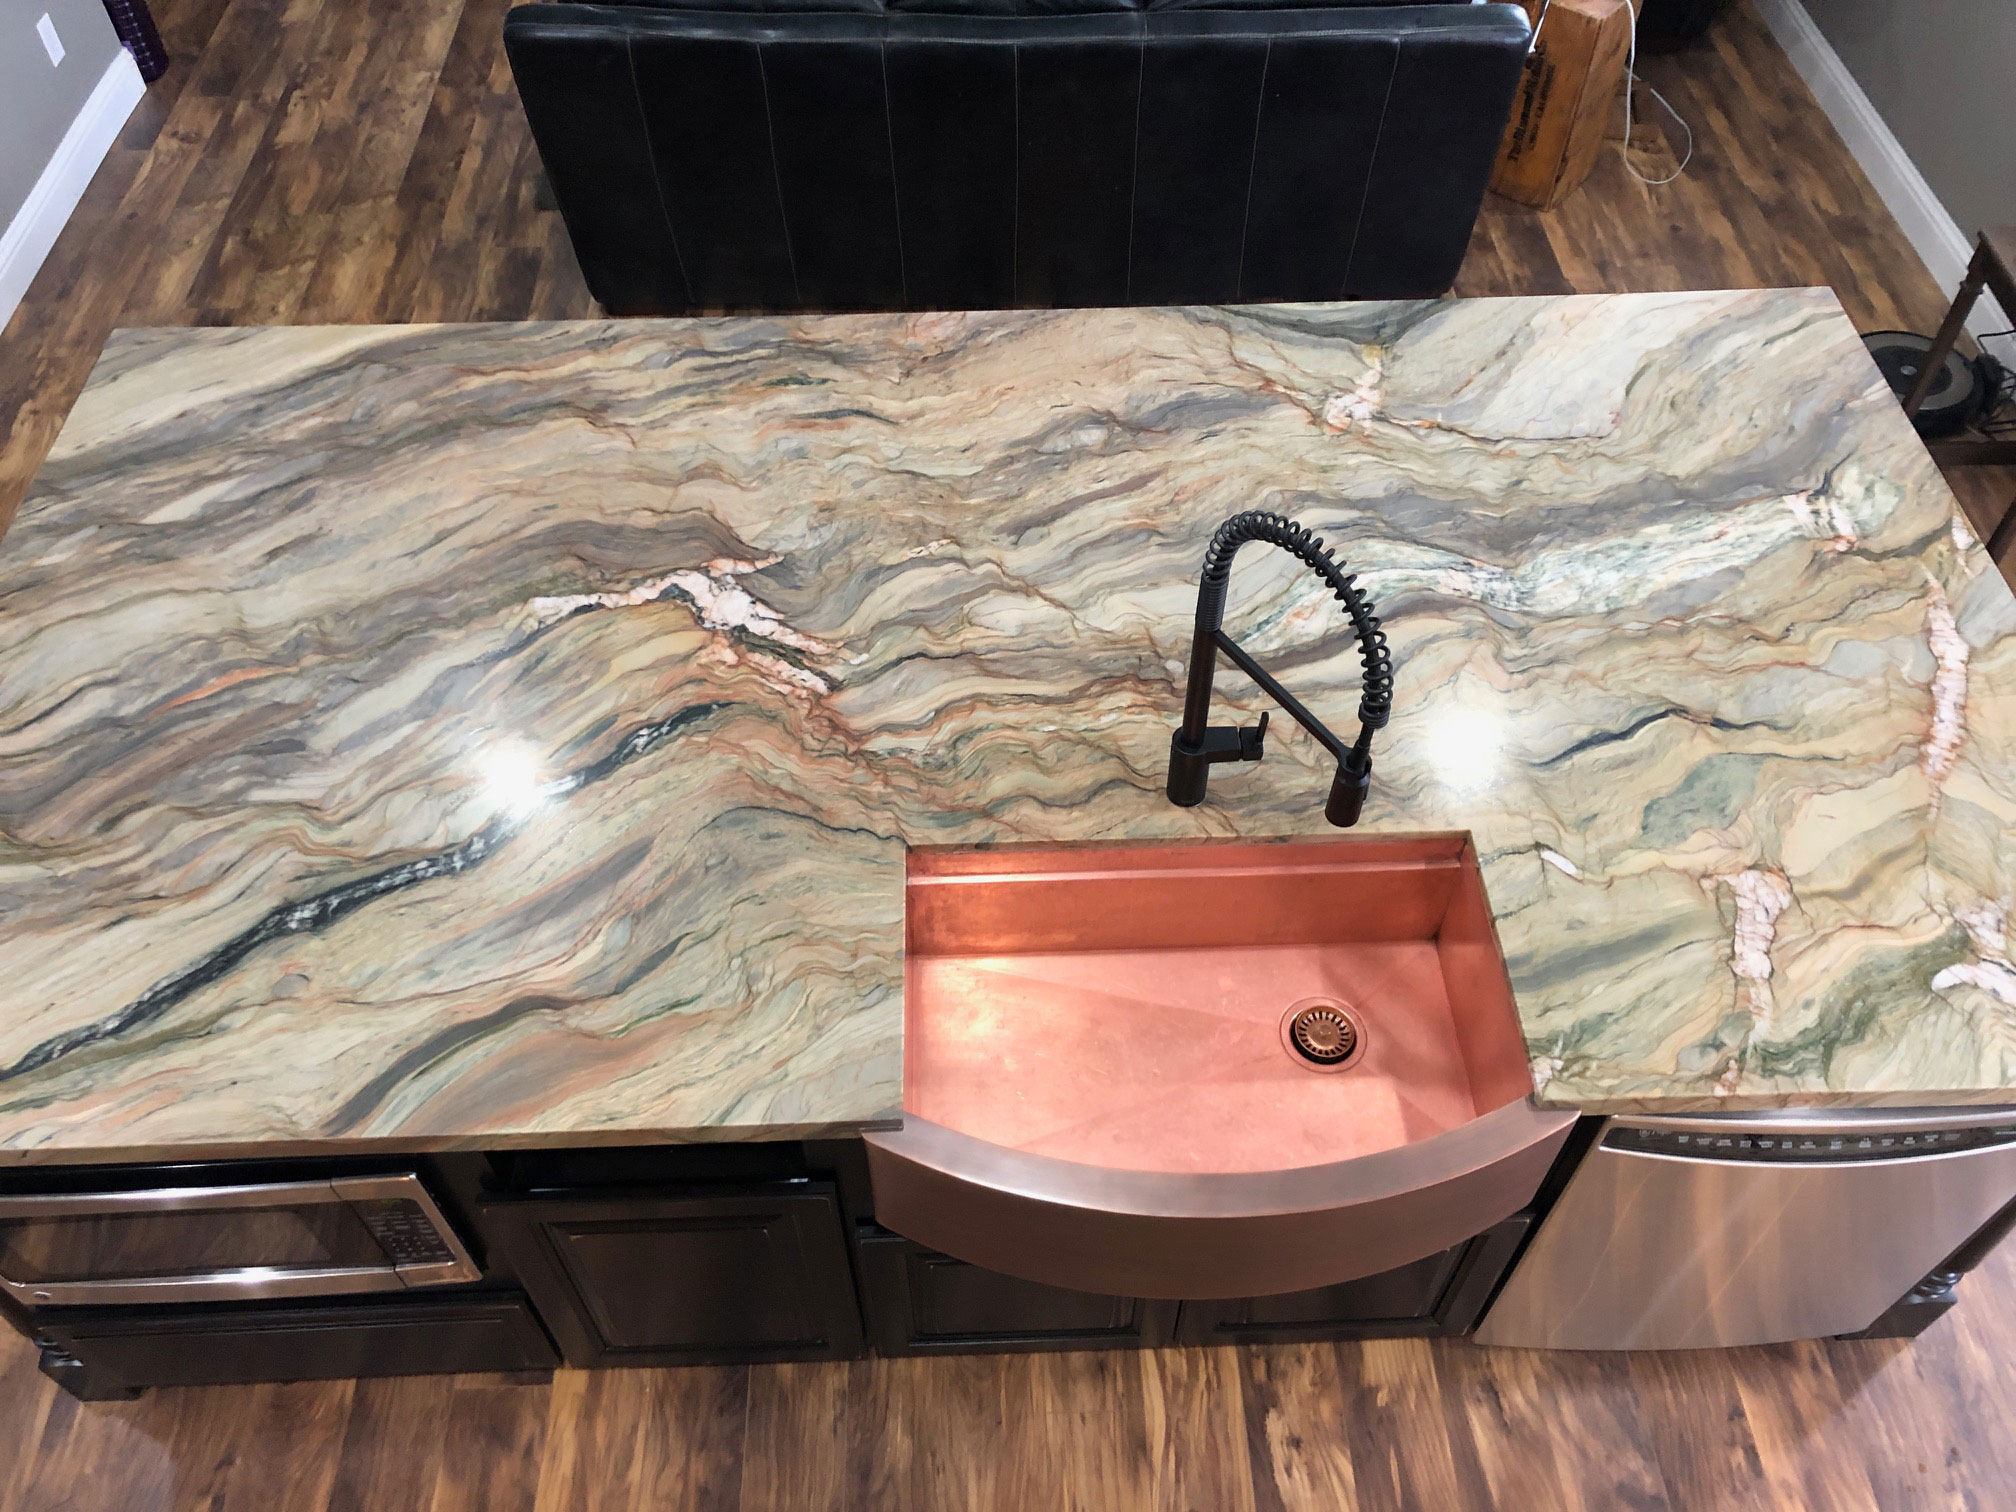 Copper apron sink in a kitchen with granite countertops and hardwood floors. World CopperSmith